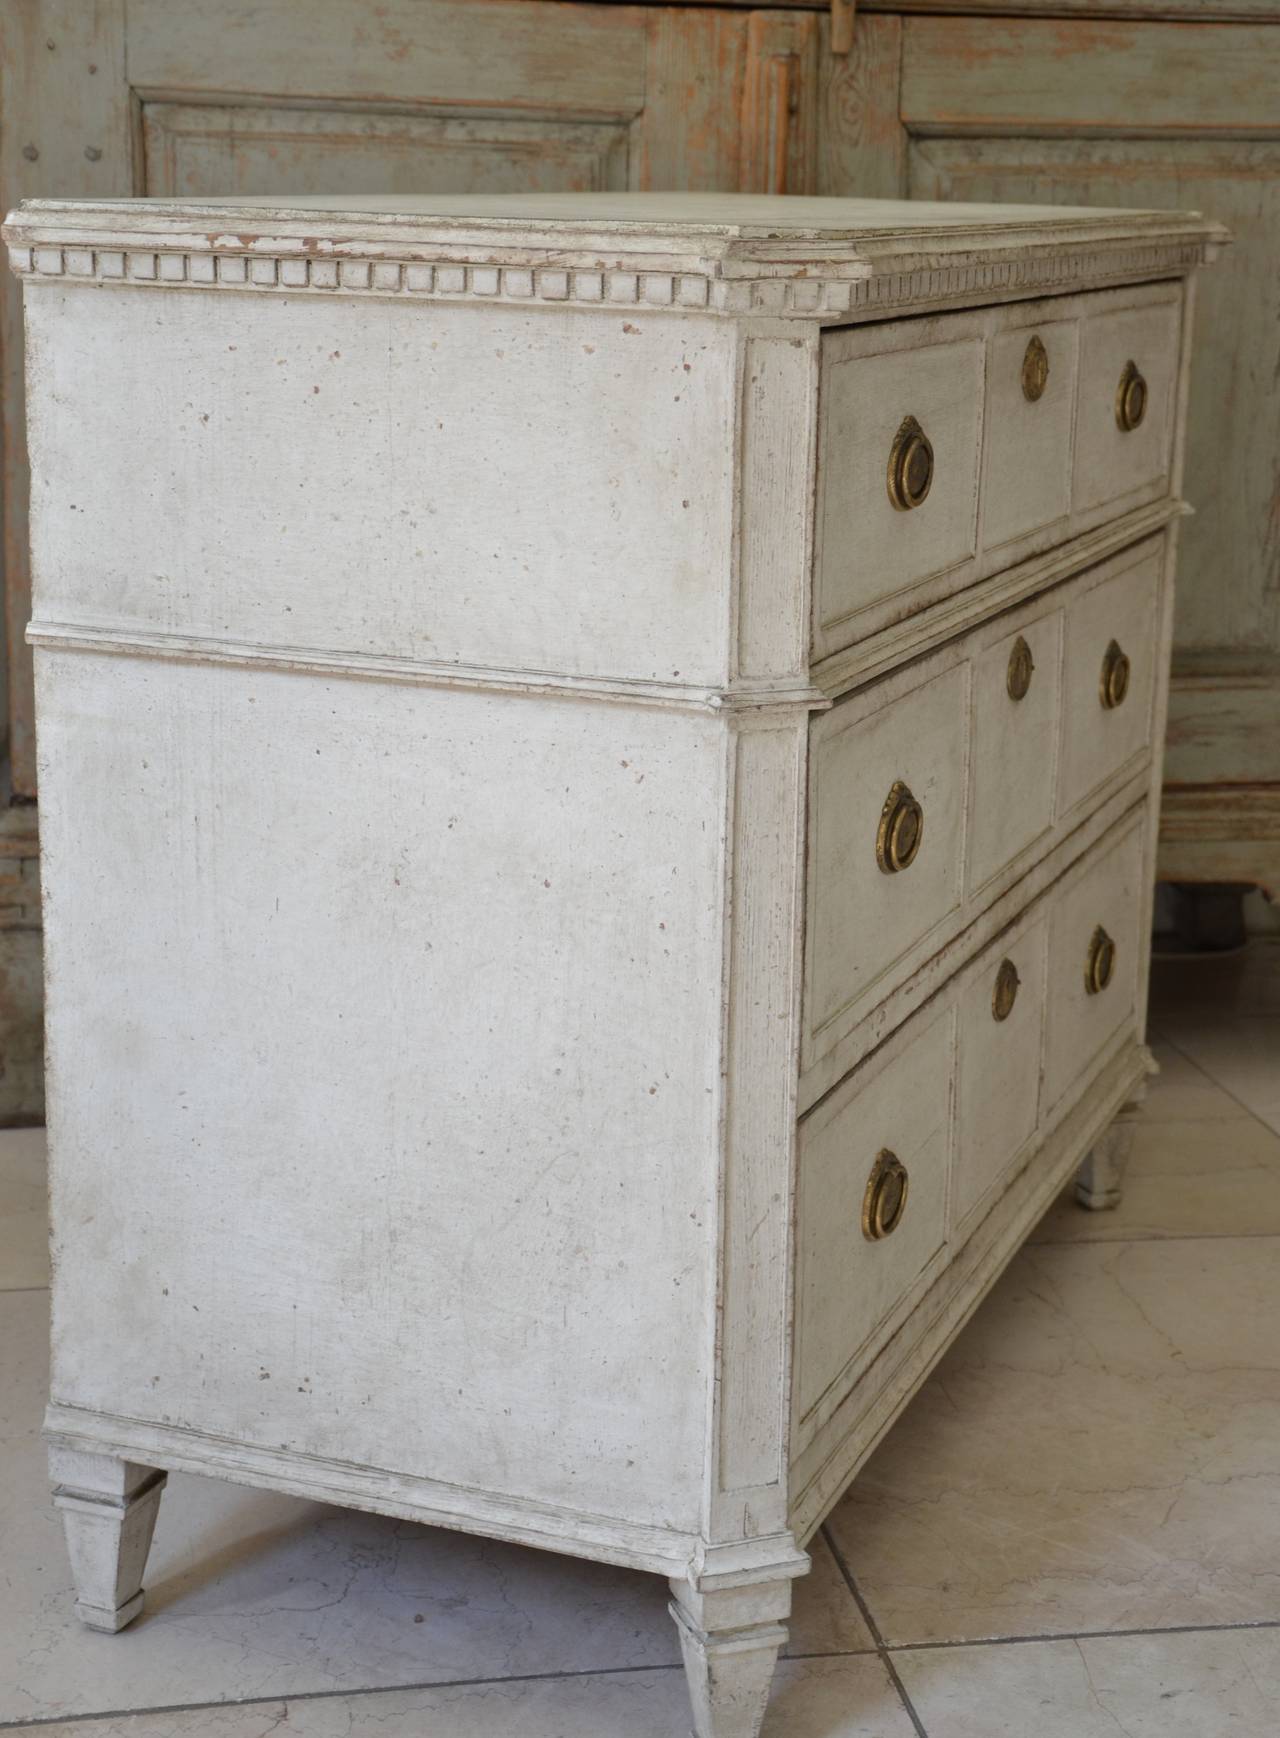 Swedish chest of three drawers with raised panel drawer fronts, canted corners and dentil moldings under the shaped top,
Sweden, circa 1850.